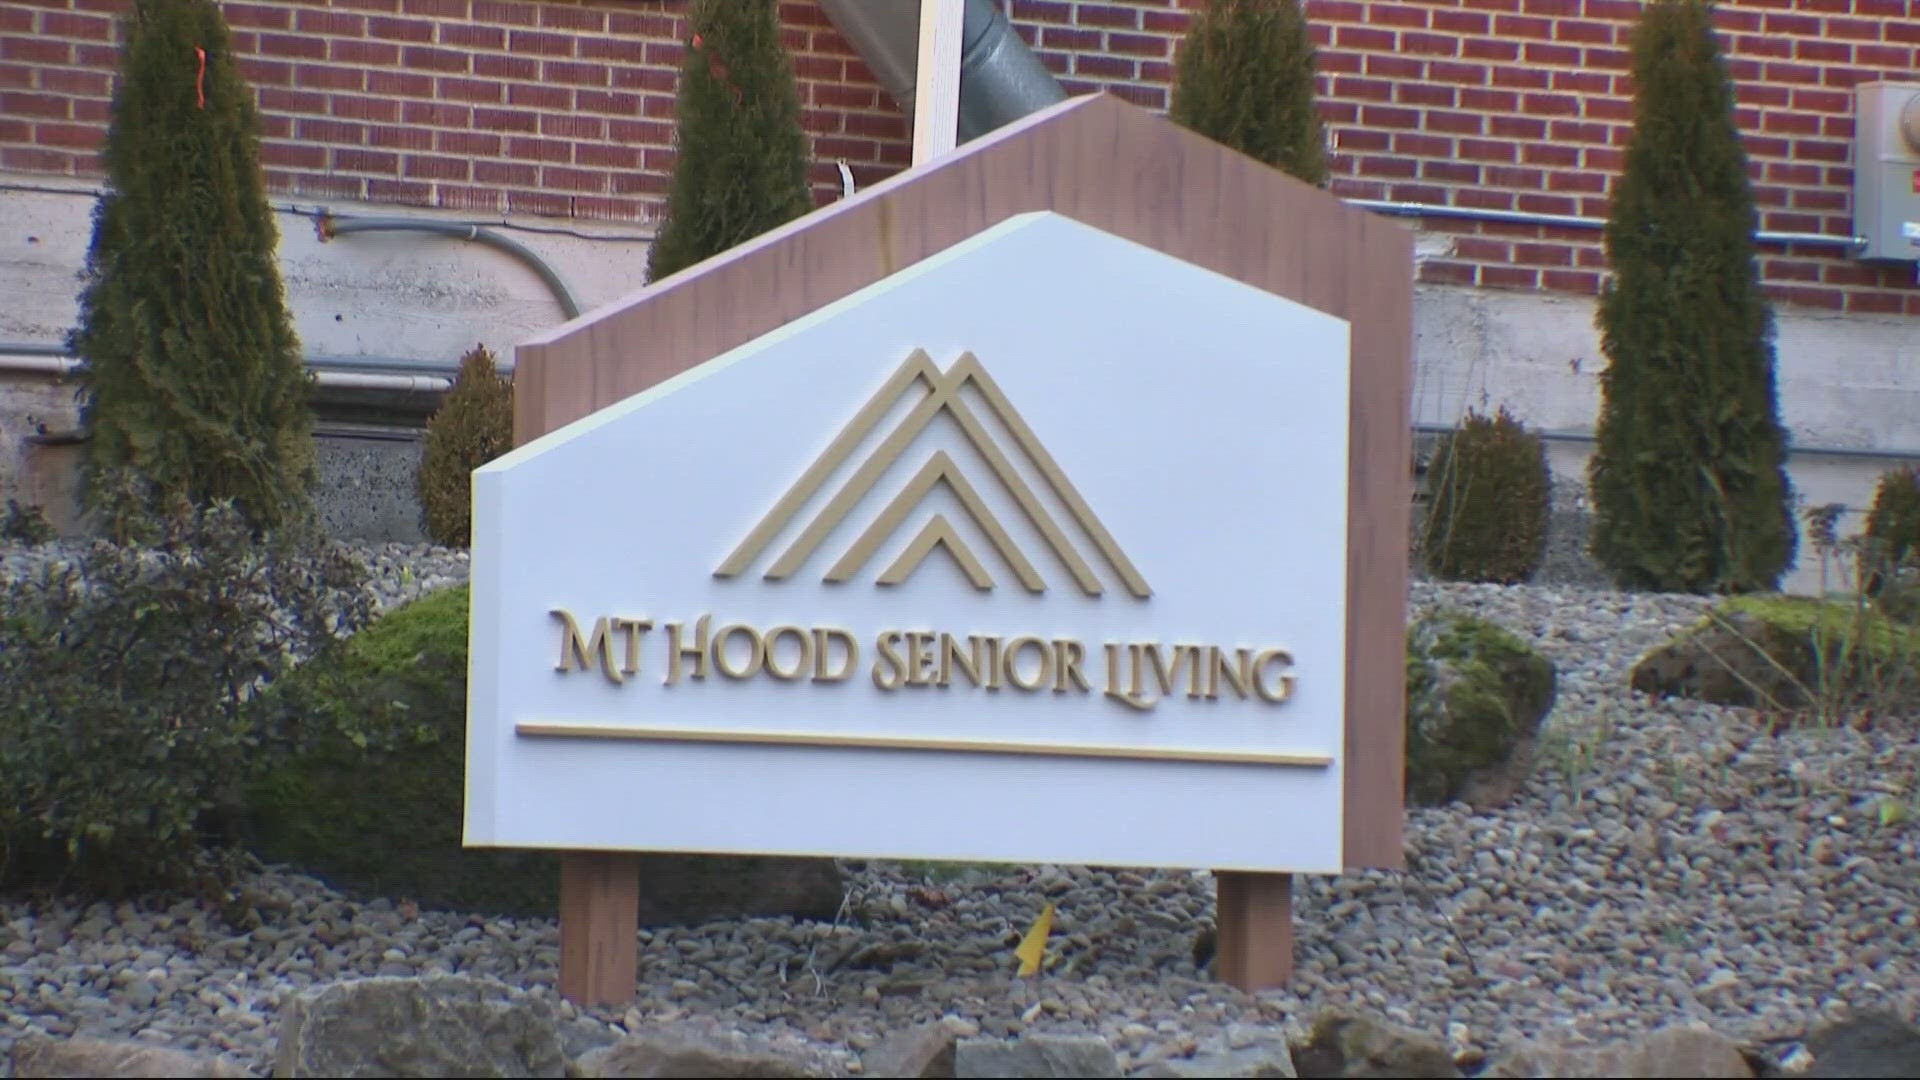 The family of a woman, 83, who died half a mile from Mount Hood Senior Living has filed a wrongful death lawsuit, saying the facility's failures led to her death.